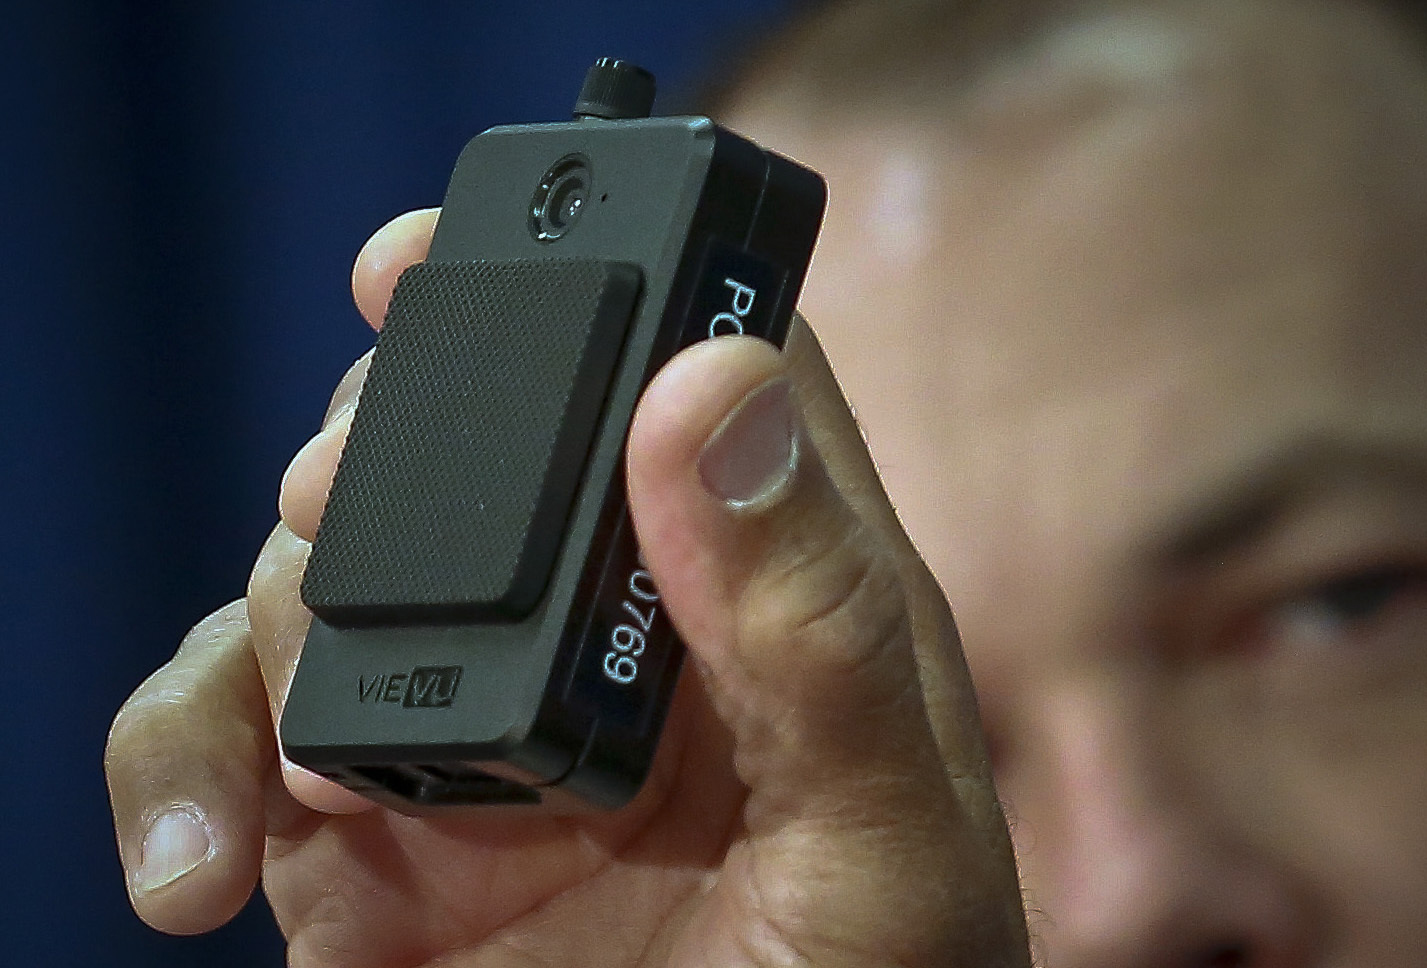 PHOTO: In this Jan. 30, 2018 file photo, a newly issued police body camera is shown during a NYPD news conference in New York.